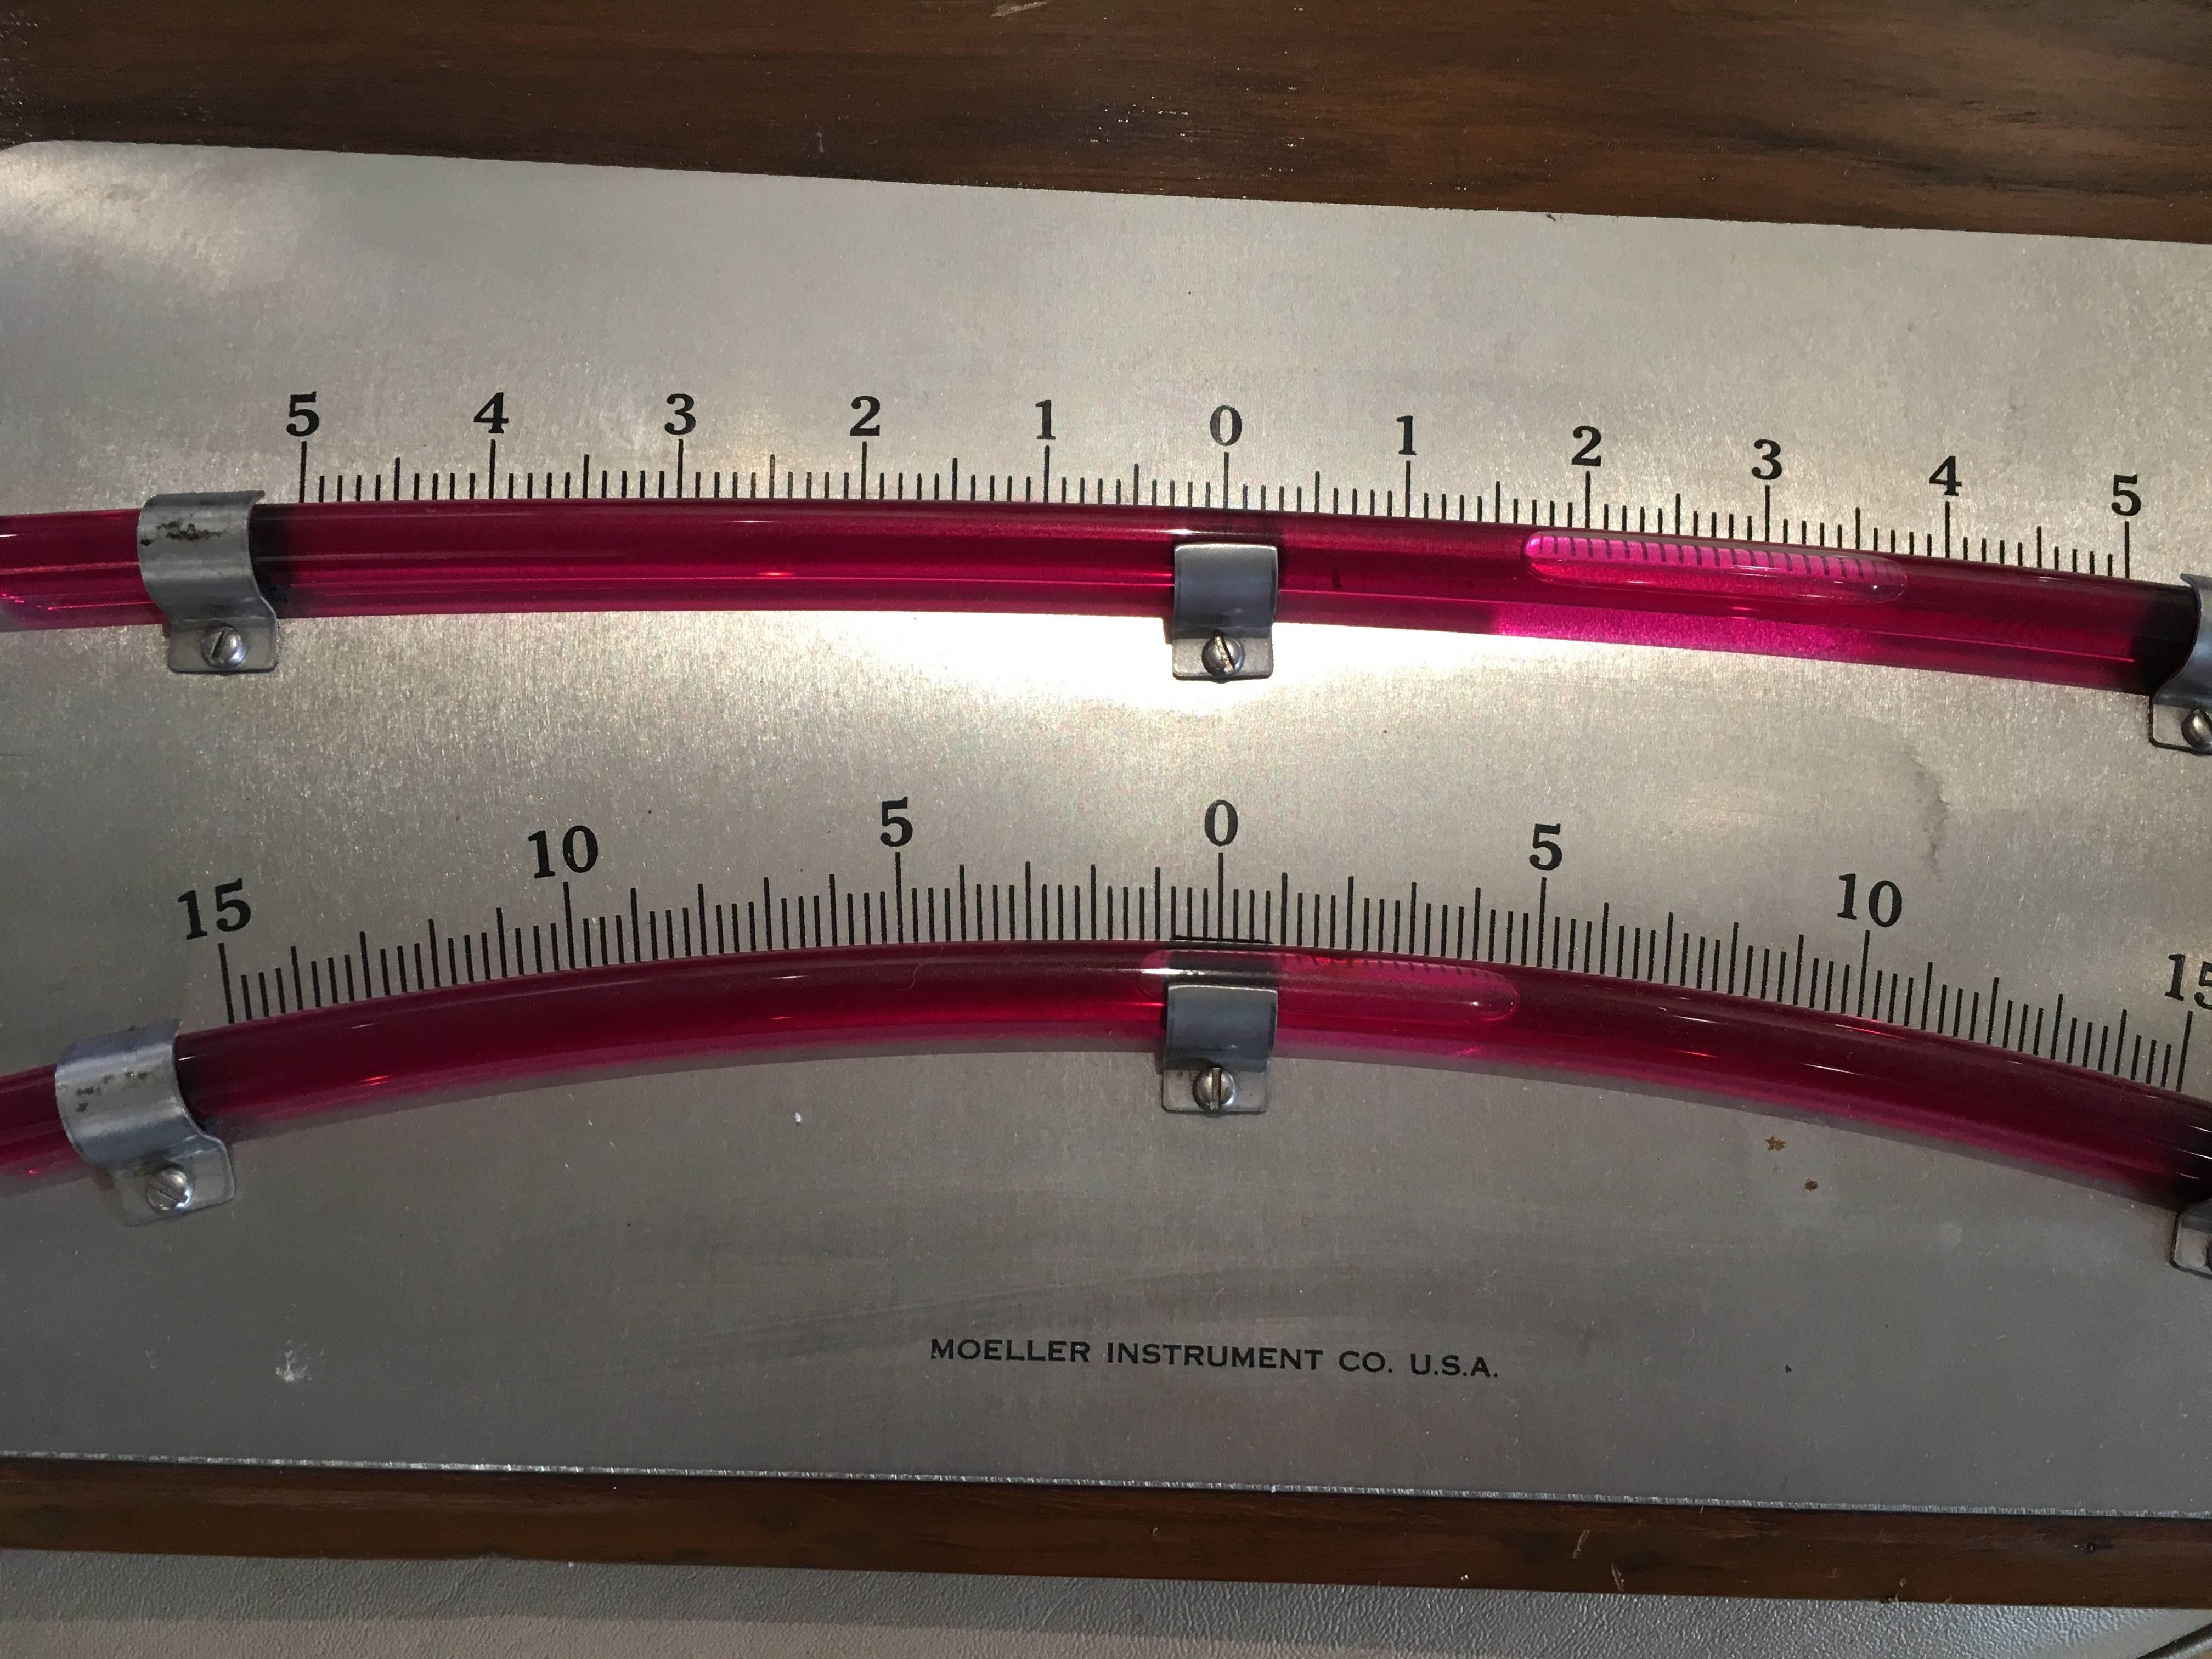 A double gauge bubble clinometer with precision glass tubing and nickel face mounted on a teak back plate. These tilt gauges were used on vessels to measure the angular slant of the ship. The readings are important when heeling underway, and also